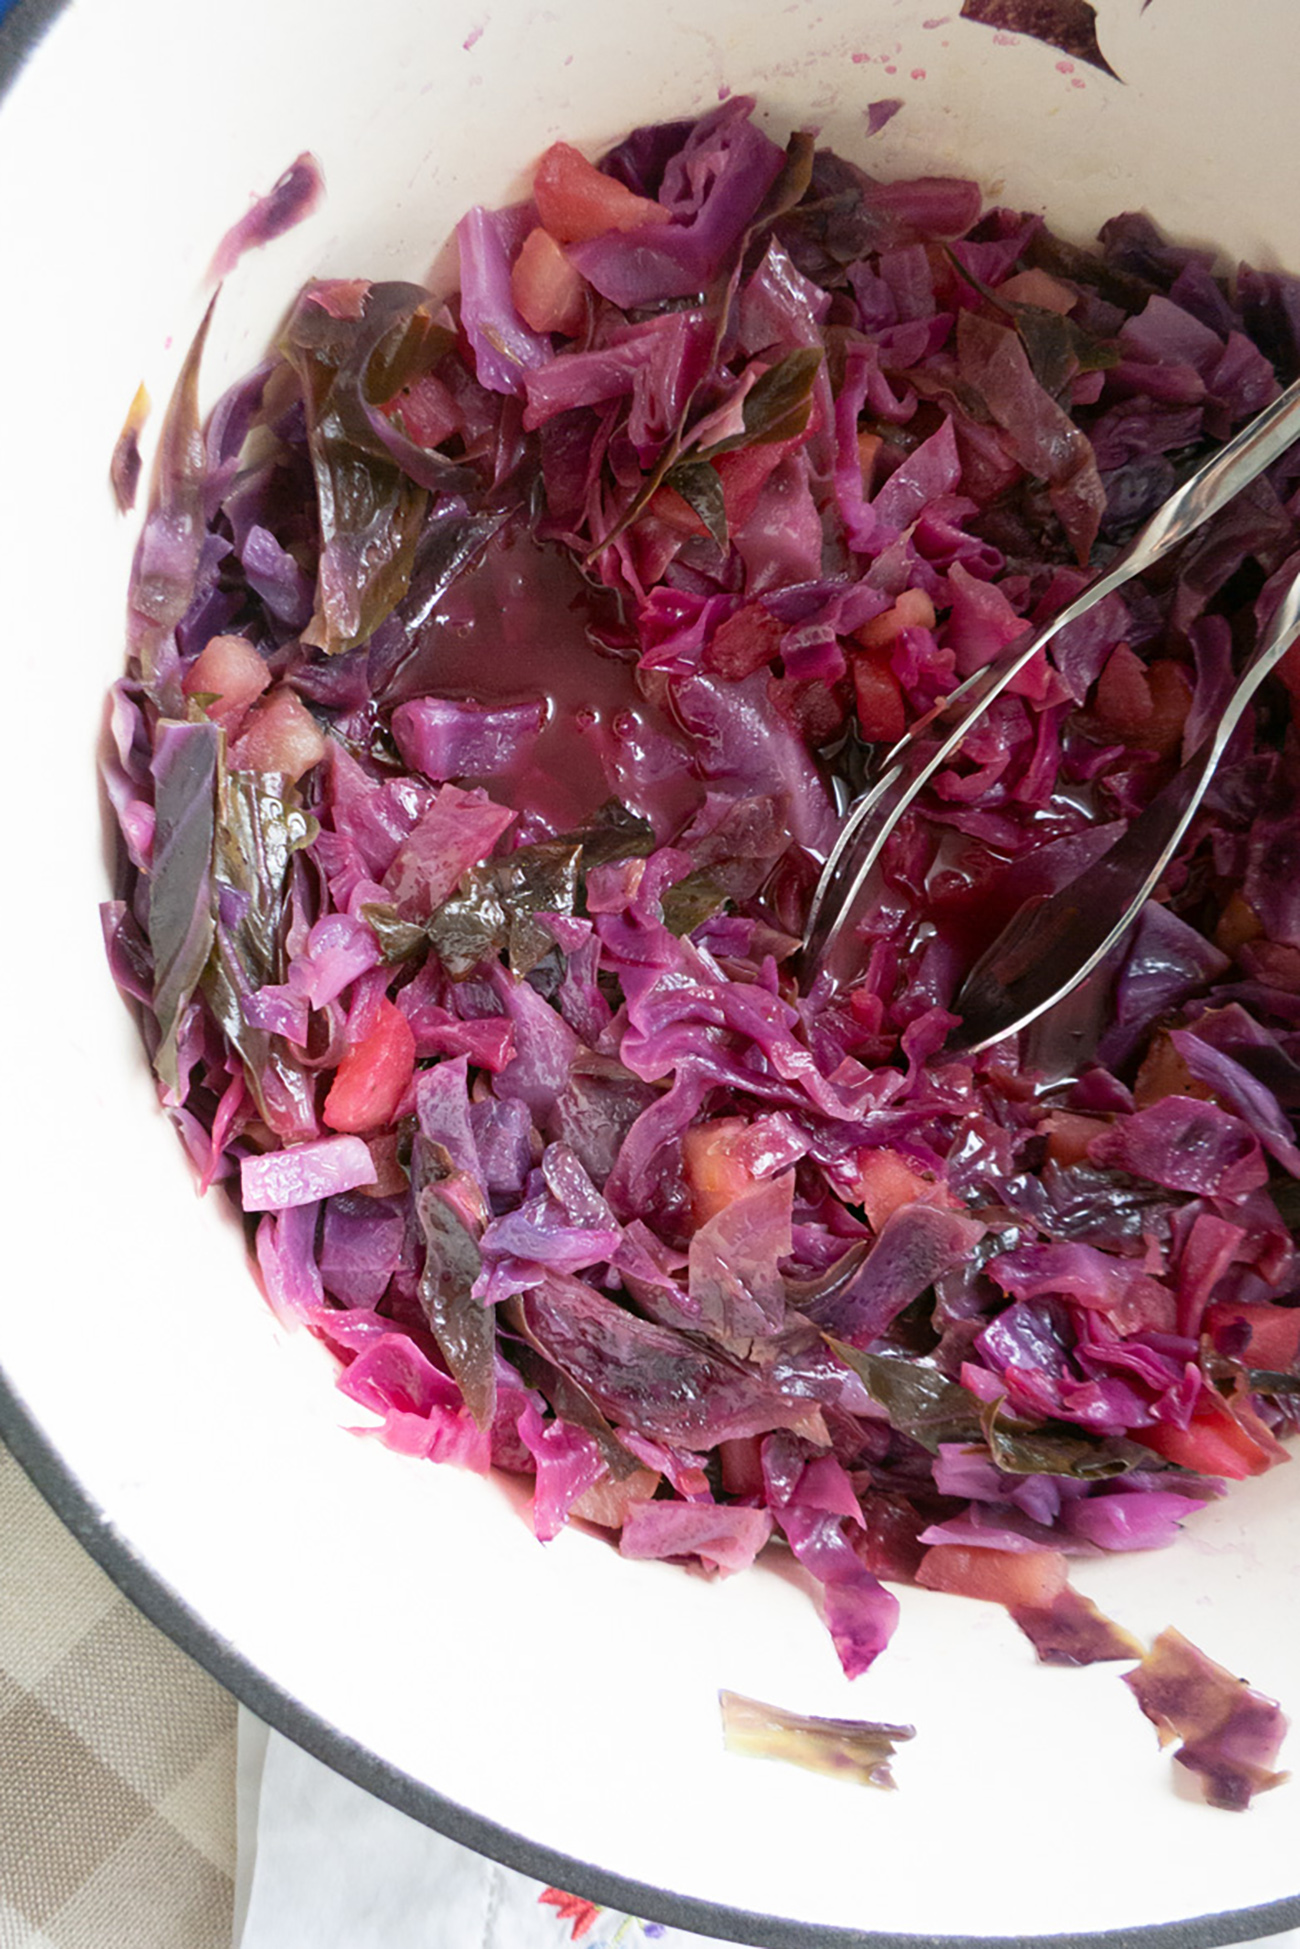 Red Cabbage and Apples
